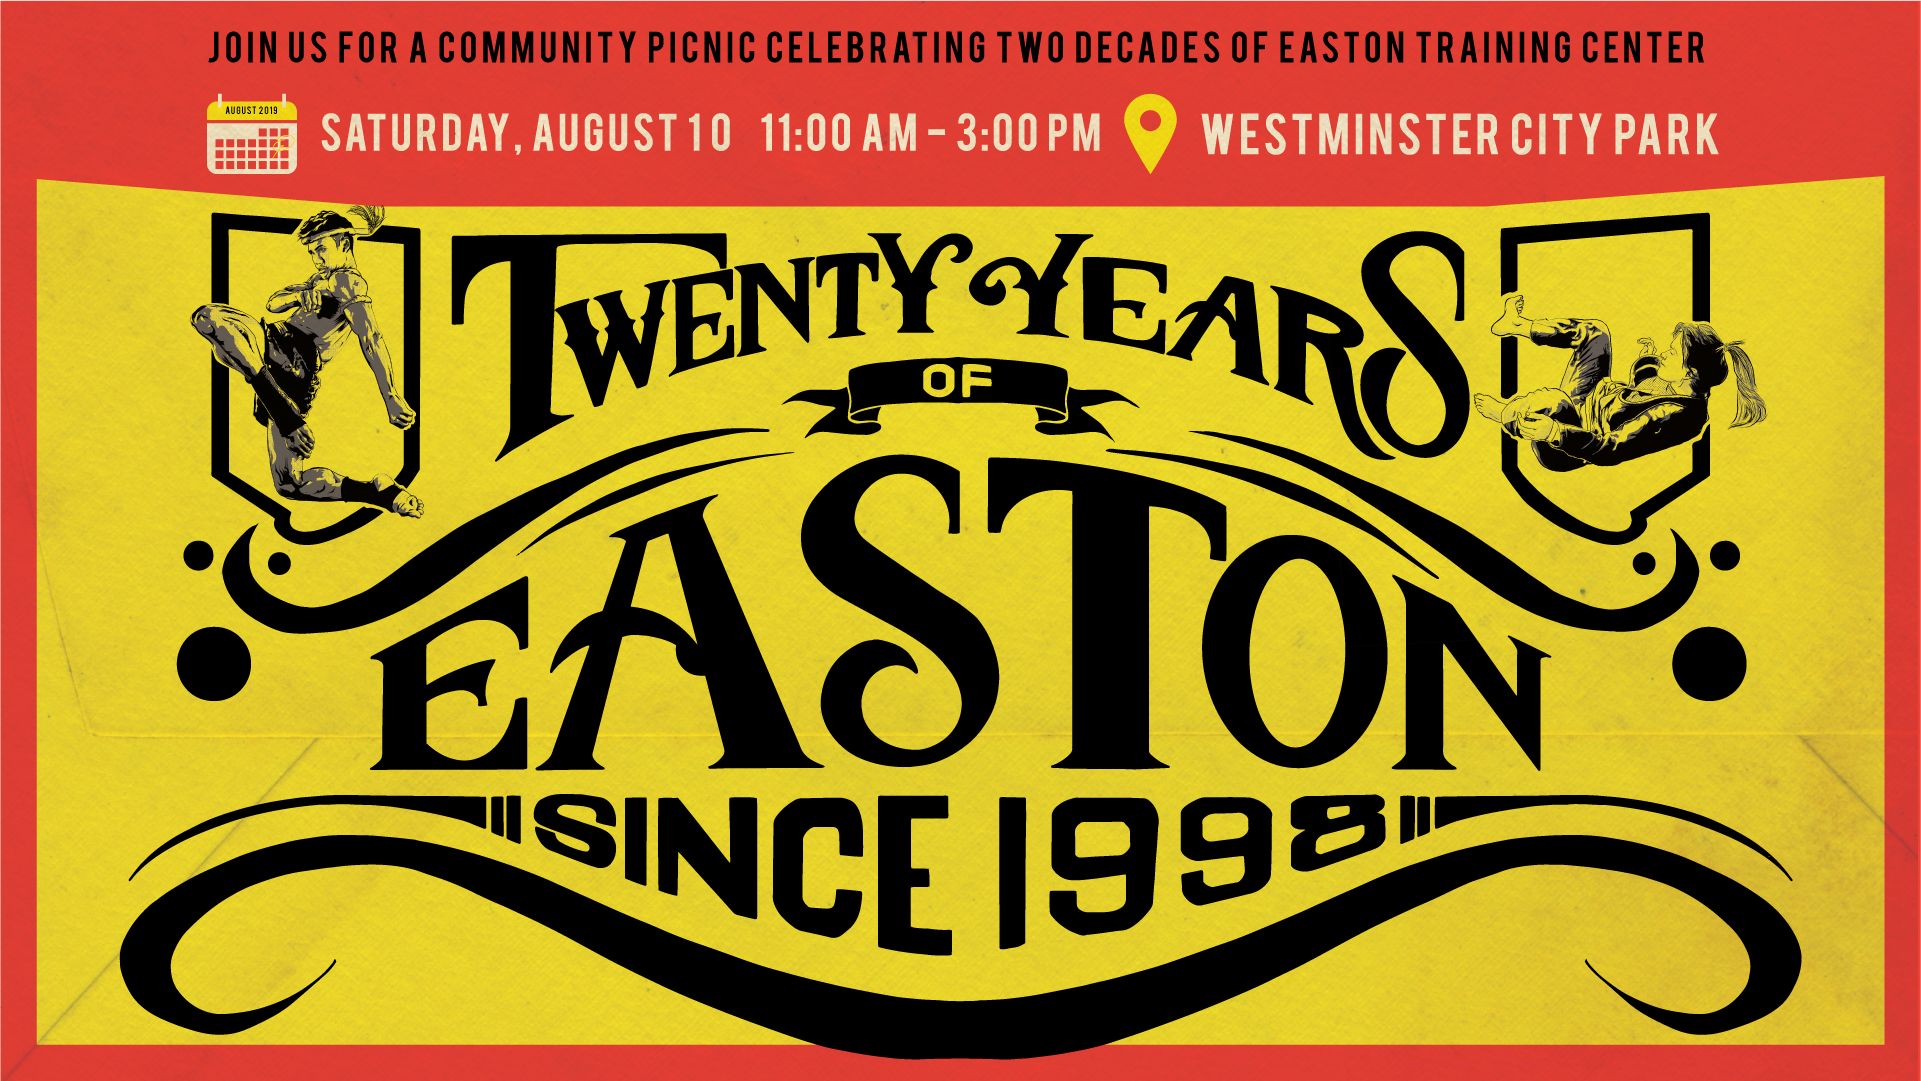 Easton 20th Anniversary Saturday 8/10/19 11:00-3:00 at Westminster City Park